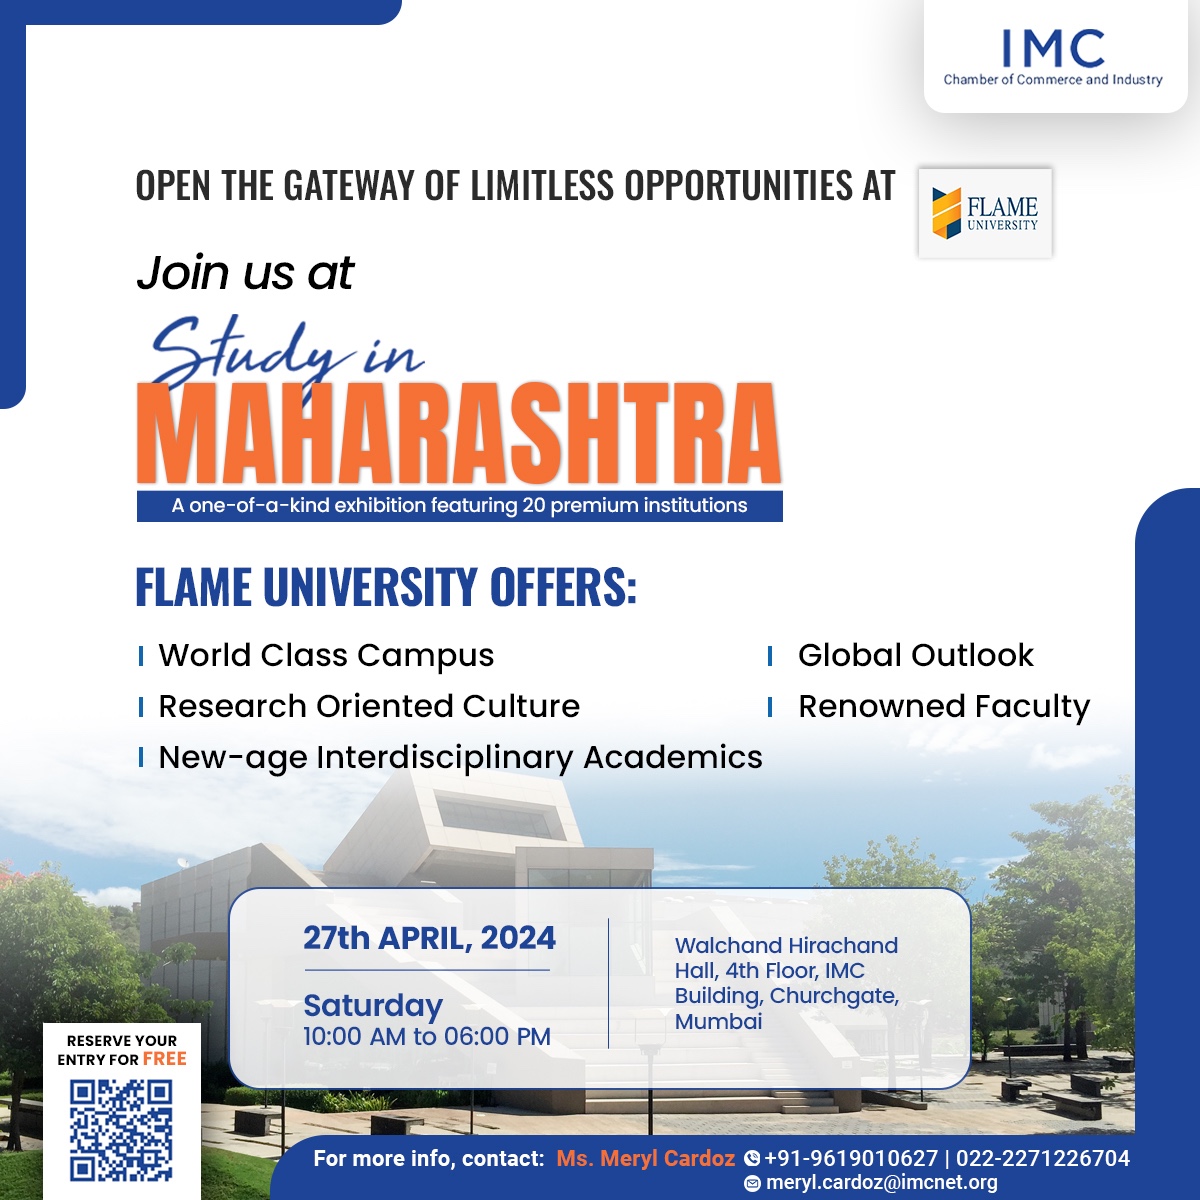 Join us at the Study in Maharashtra Exhibition and engage with @FLAMEUniversity - your gateway to limitless opportunities! 🗓️ Date: 27th April, 2024 (Saturday) 🕰️ Time: 10:00 AM - 06:00 PM 📍 Venue: Walchand Hirachand Hall, 4th Floor, IMC Building, Churchgate, Mumbai Register